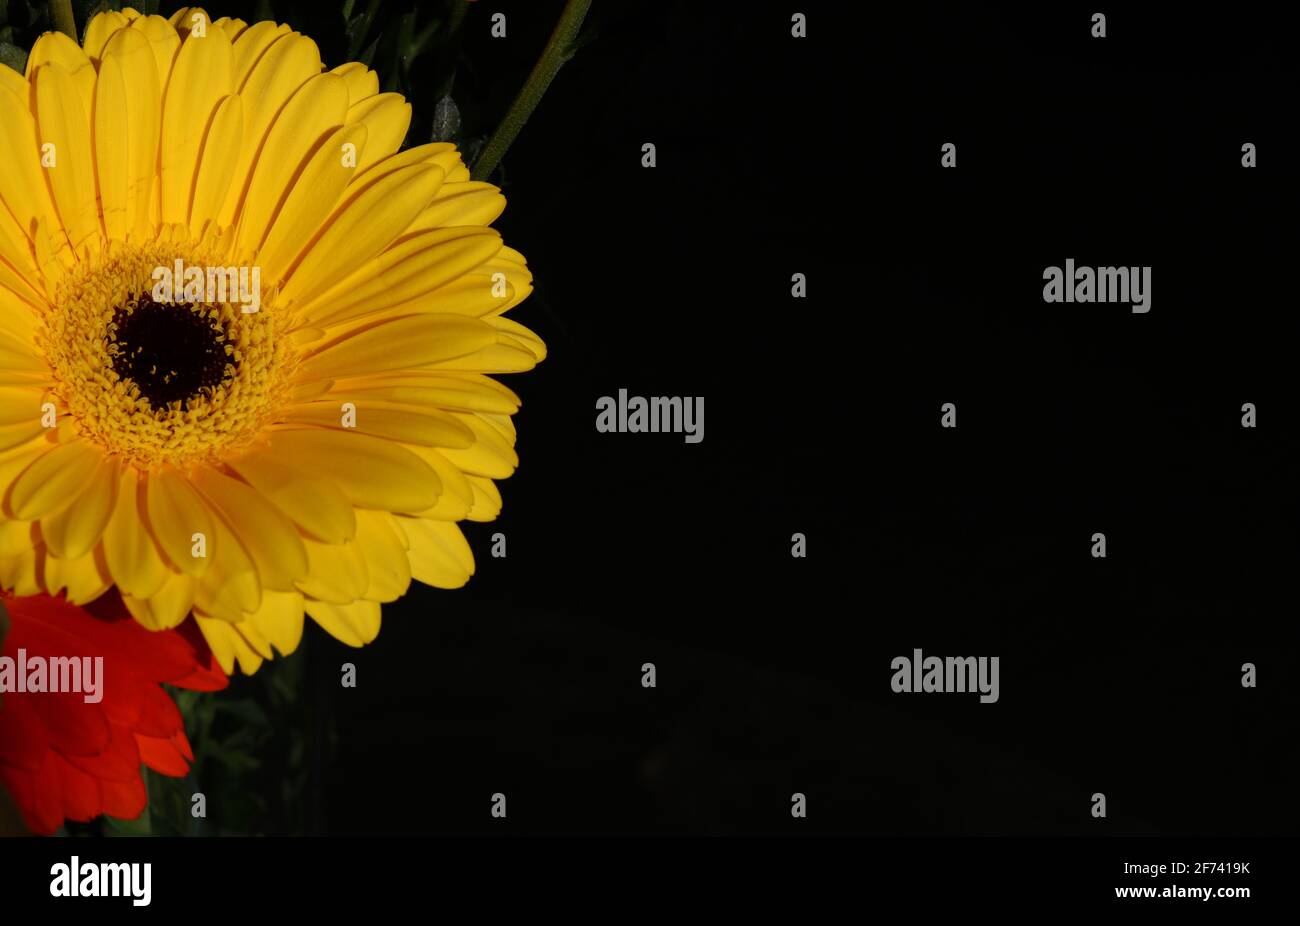 Orange and yellow gerbera flowers against black background with copy space Stock Photo